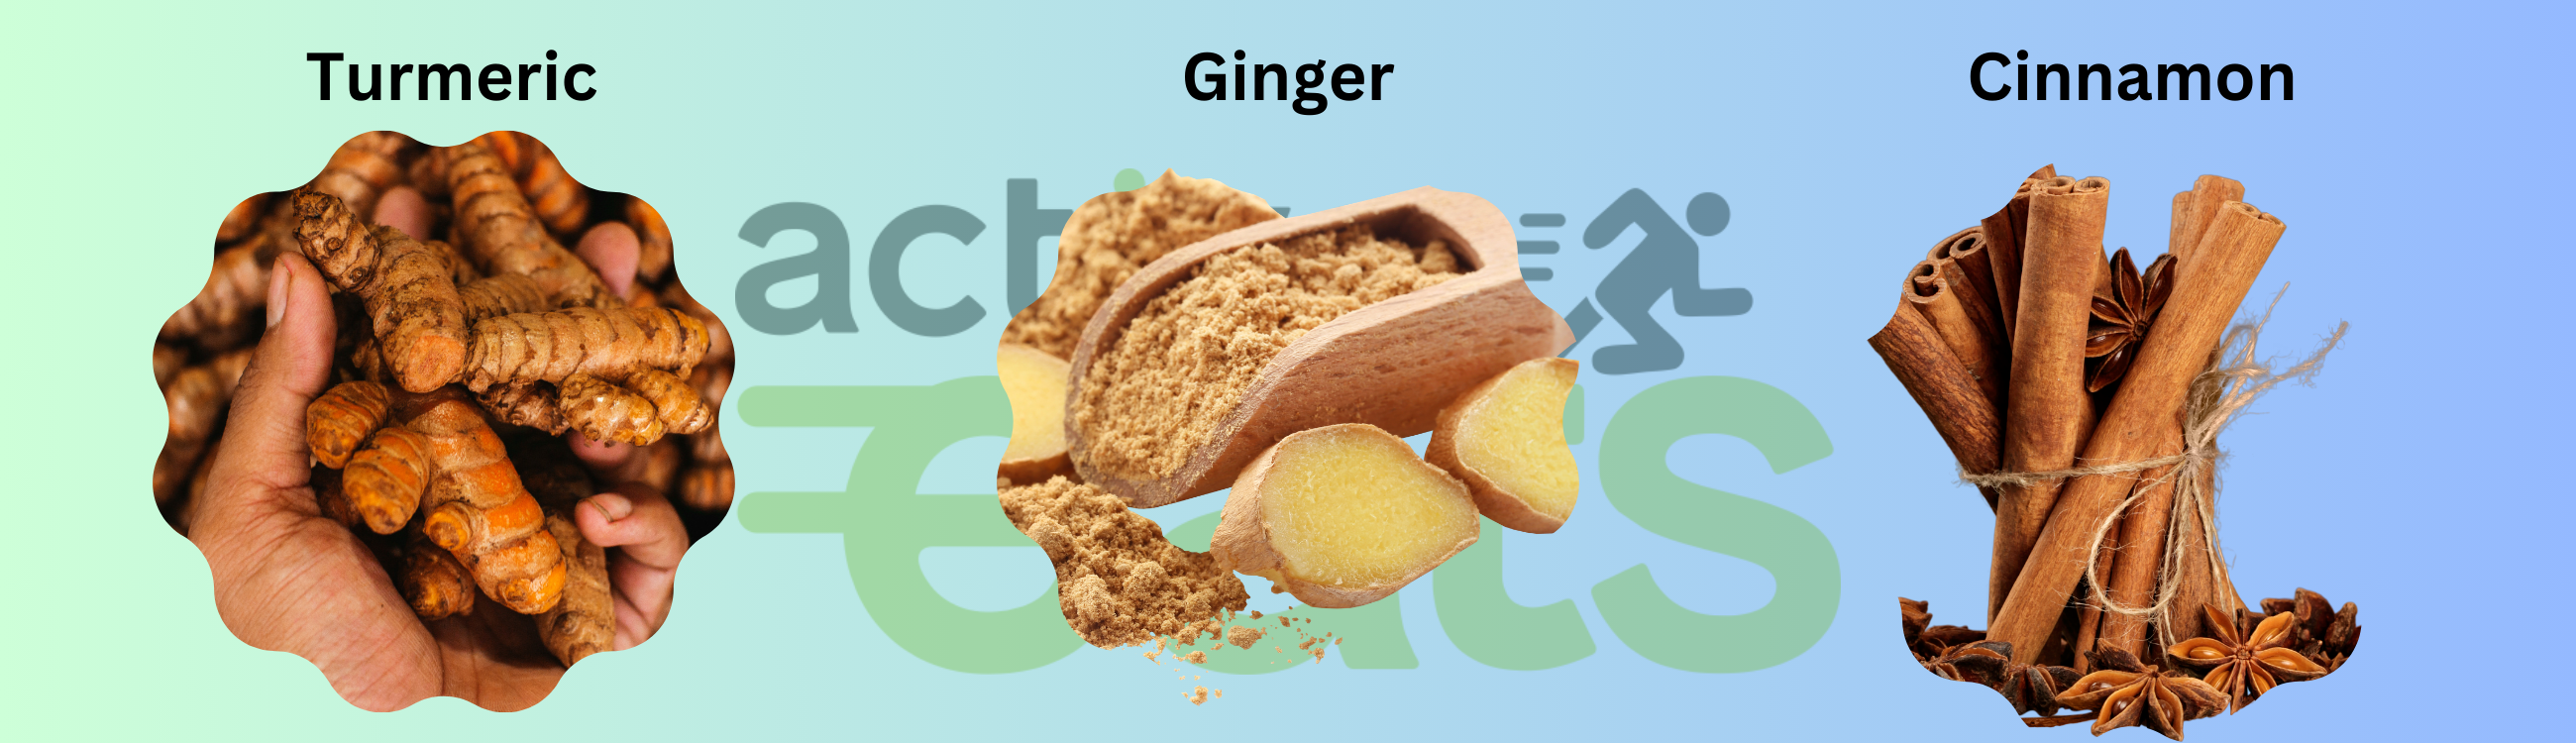 Pictures of Turmeric, Ginger and Cinnamon 